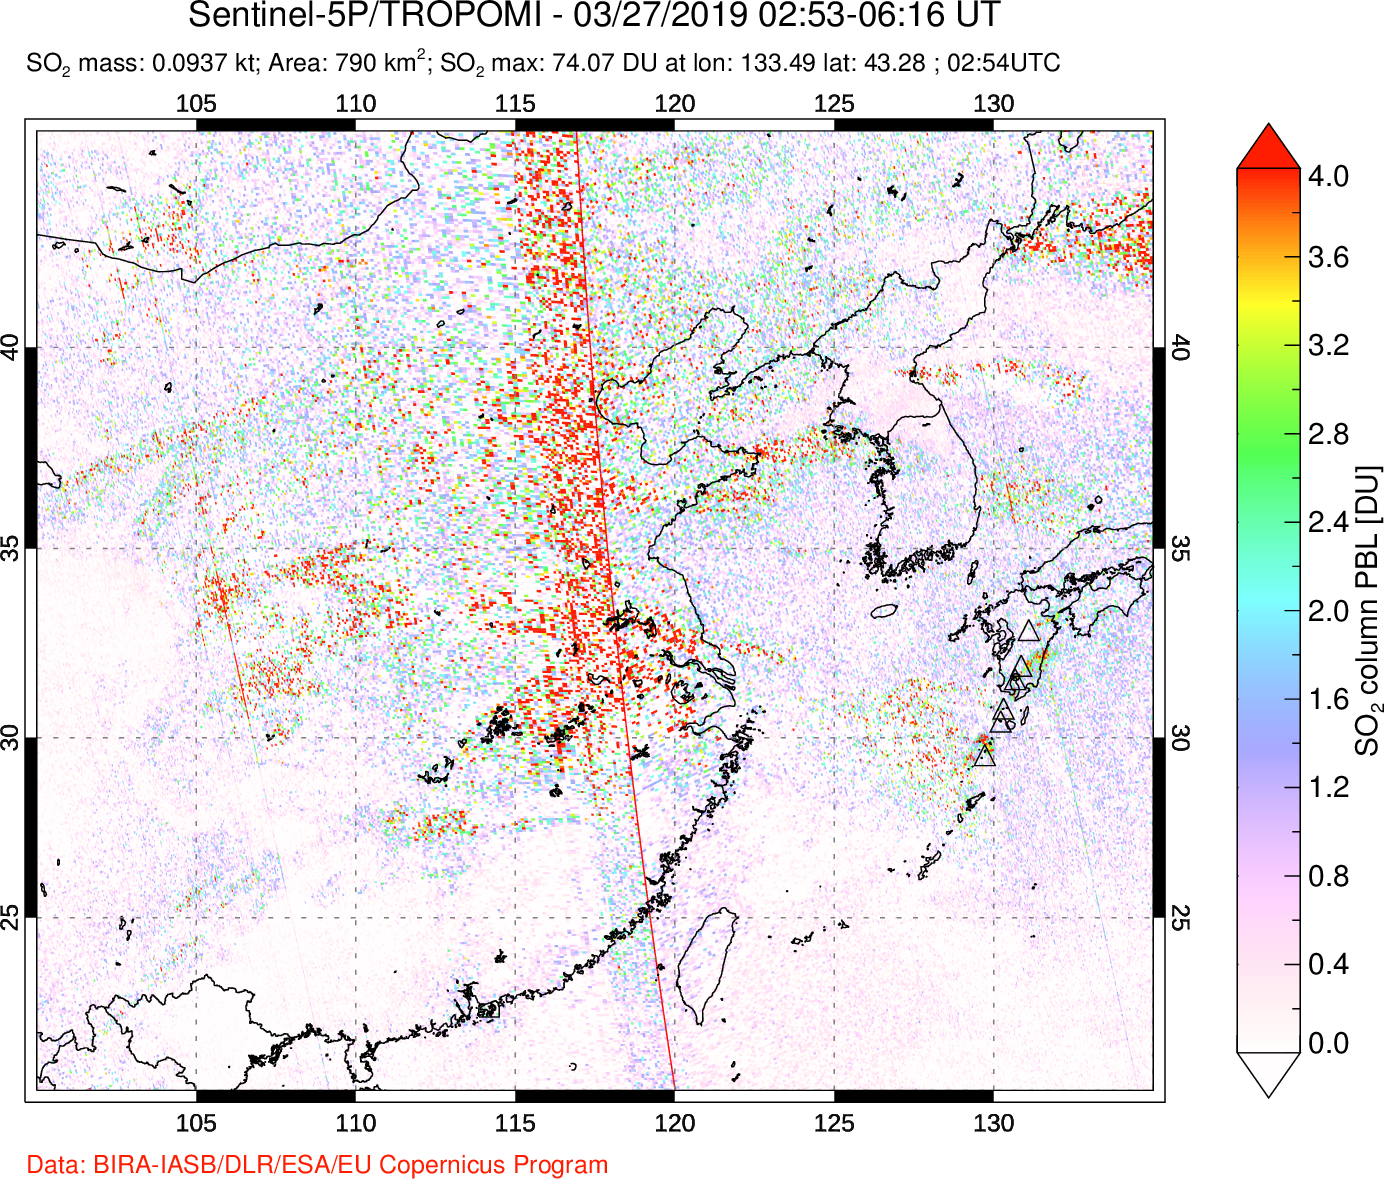 A sulfur dioxide image over Eastern China on Mar 27, 2019.